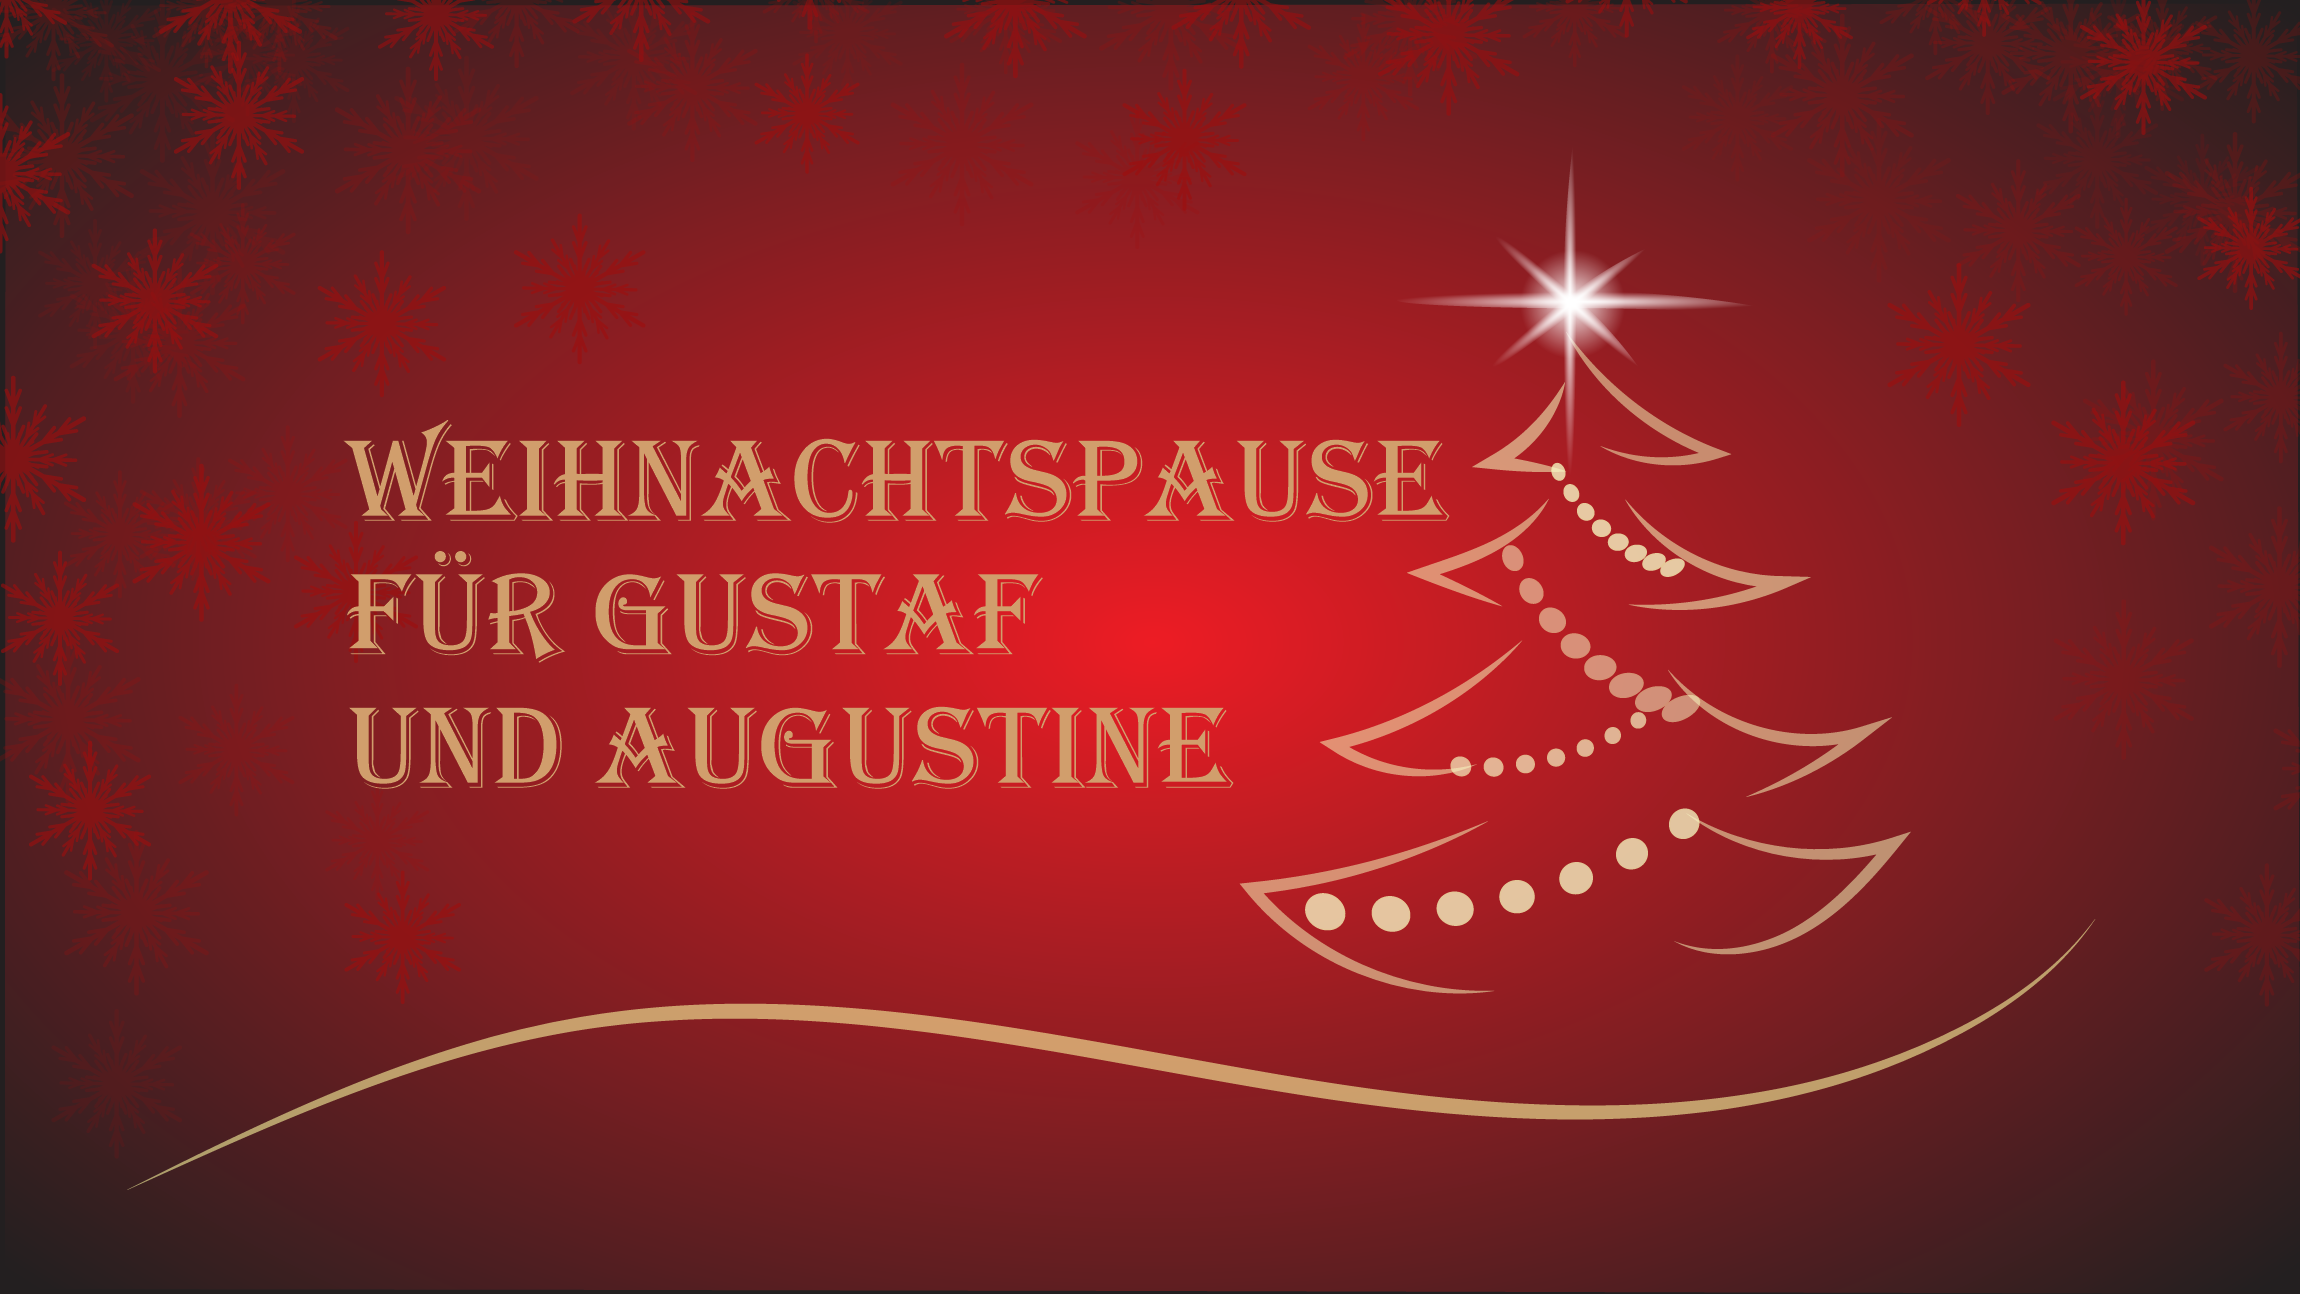 You are currently viewing Weihnachtspause für Gustaf